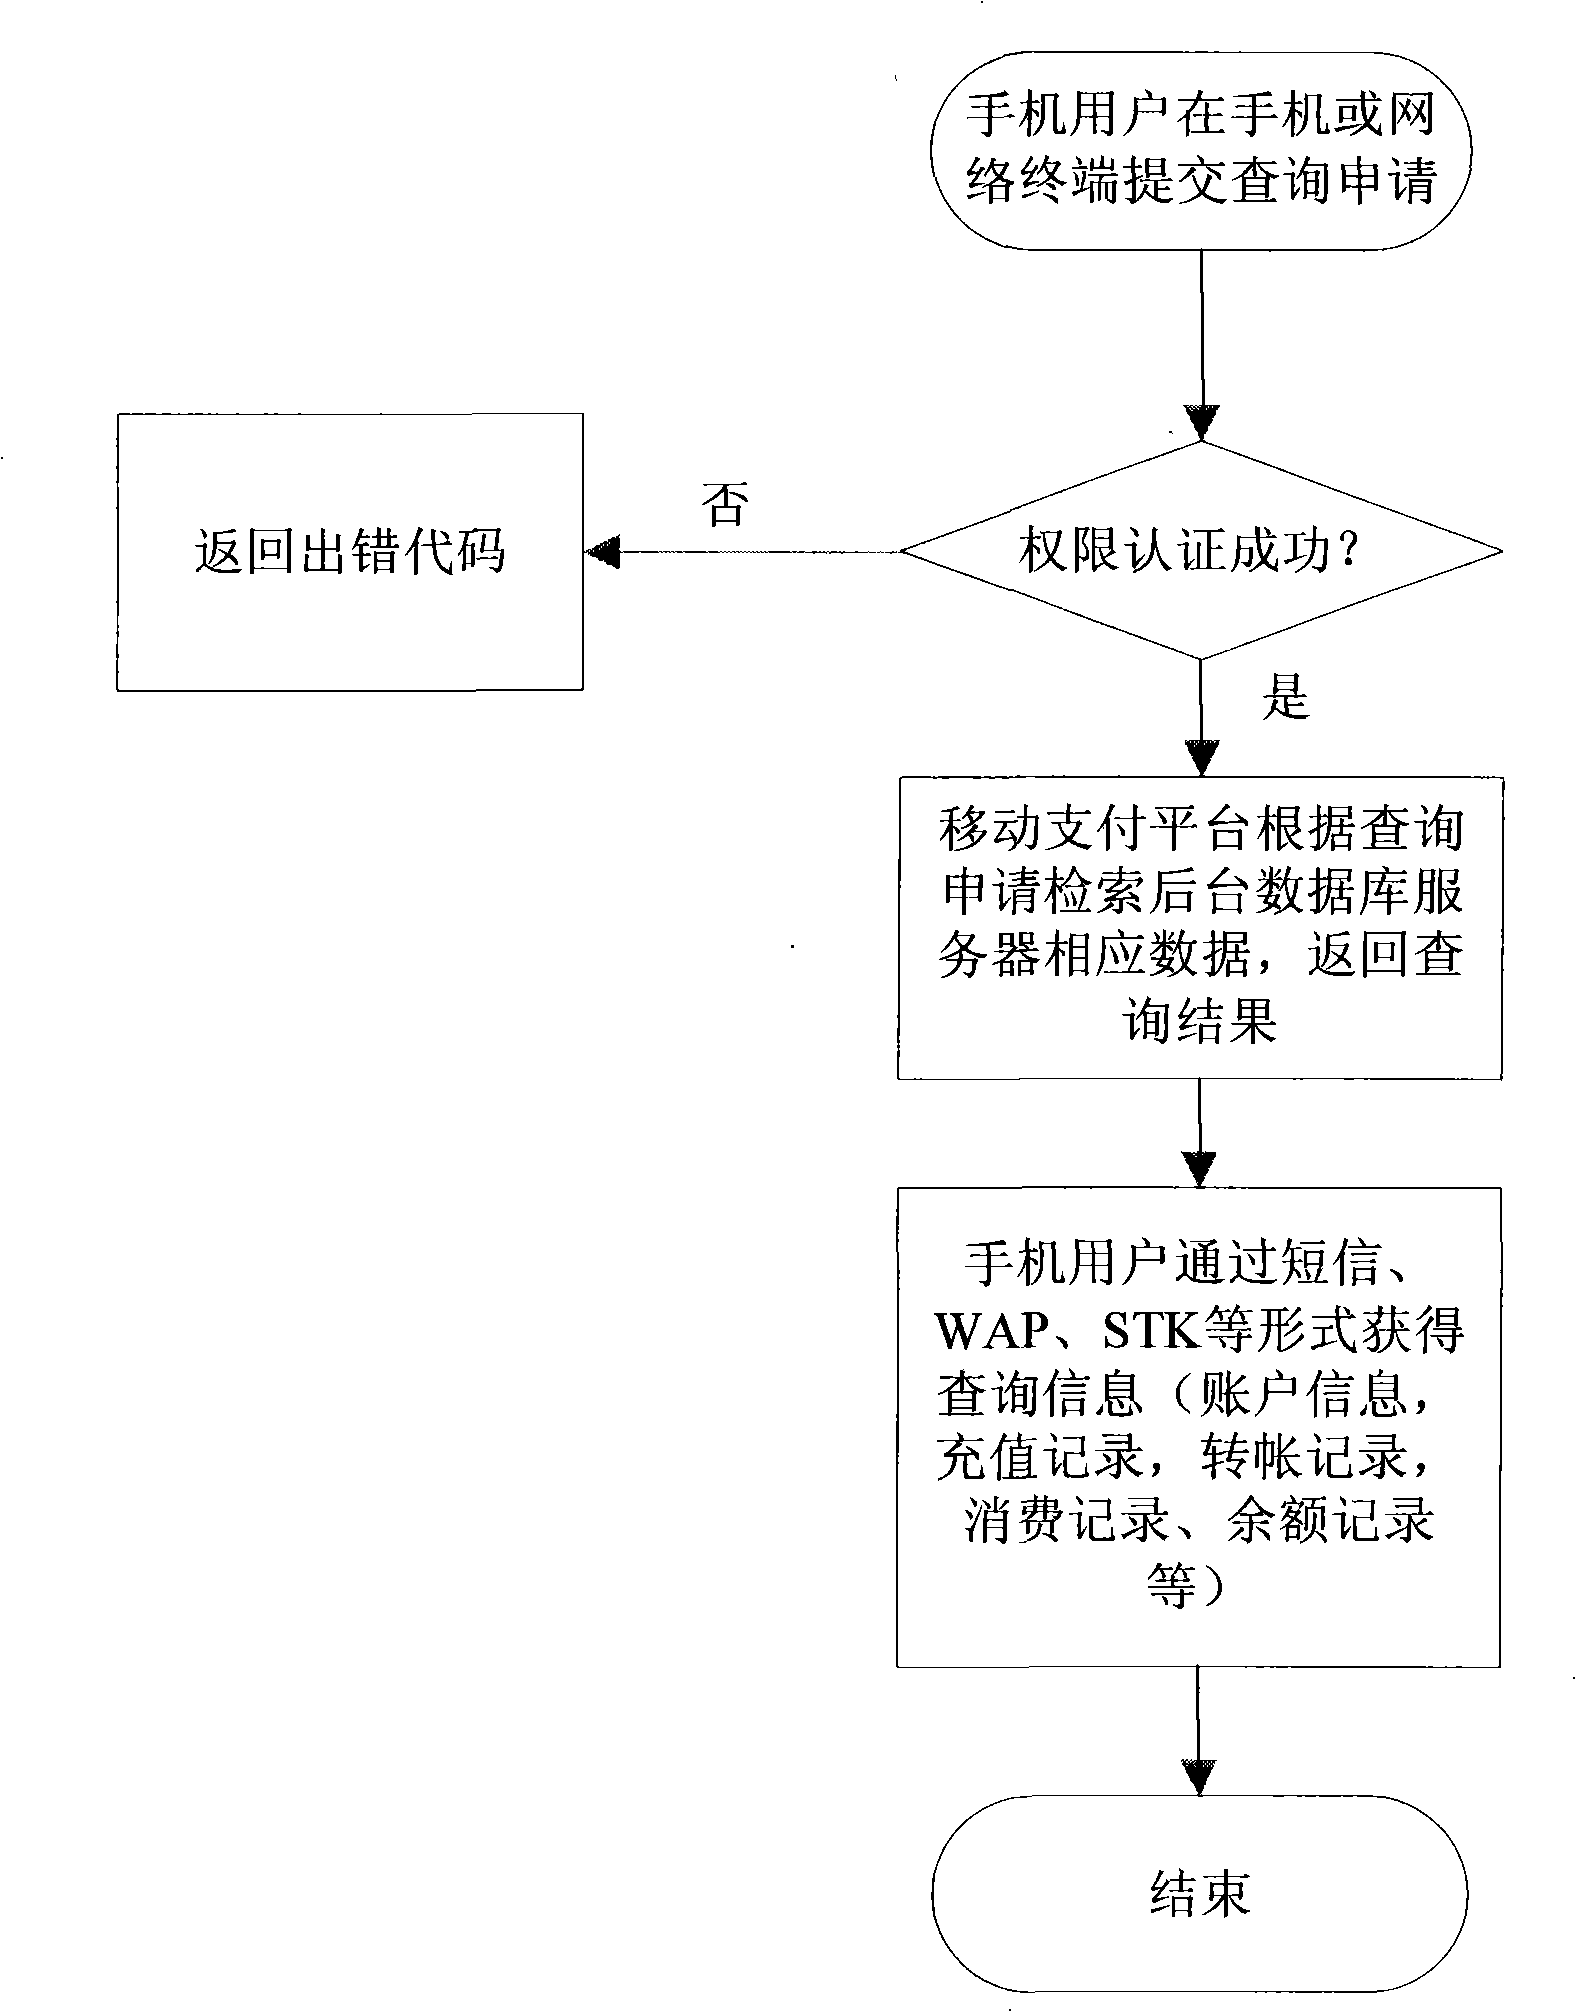 Non-contact card application management system and management method based on mobile communication